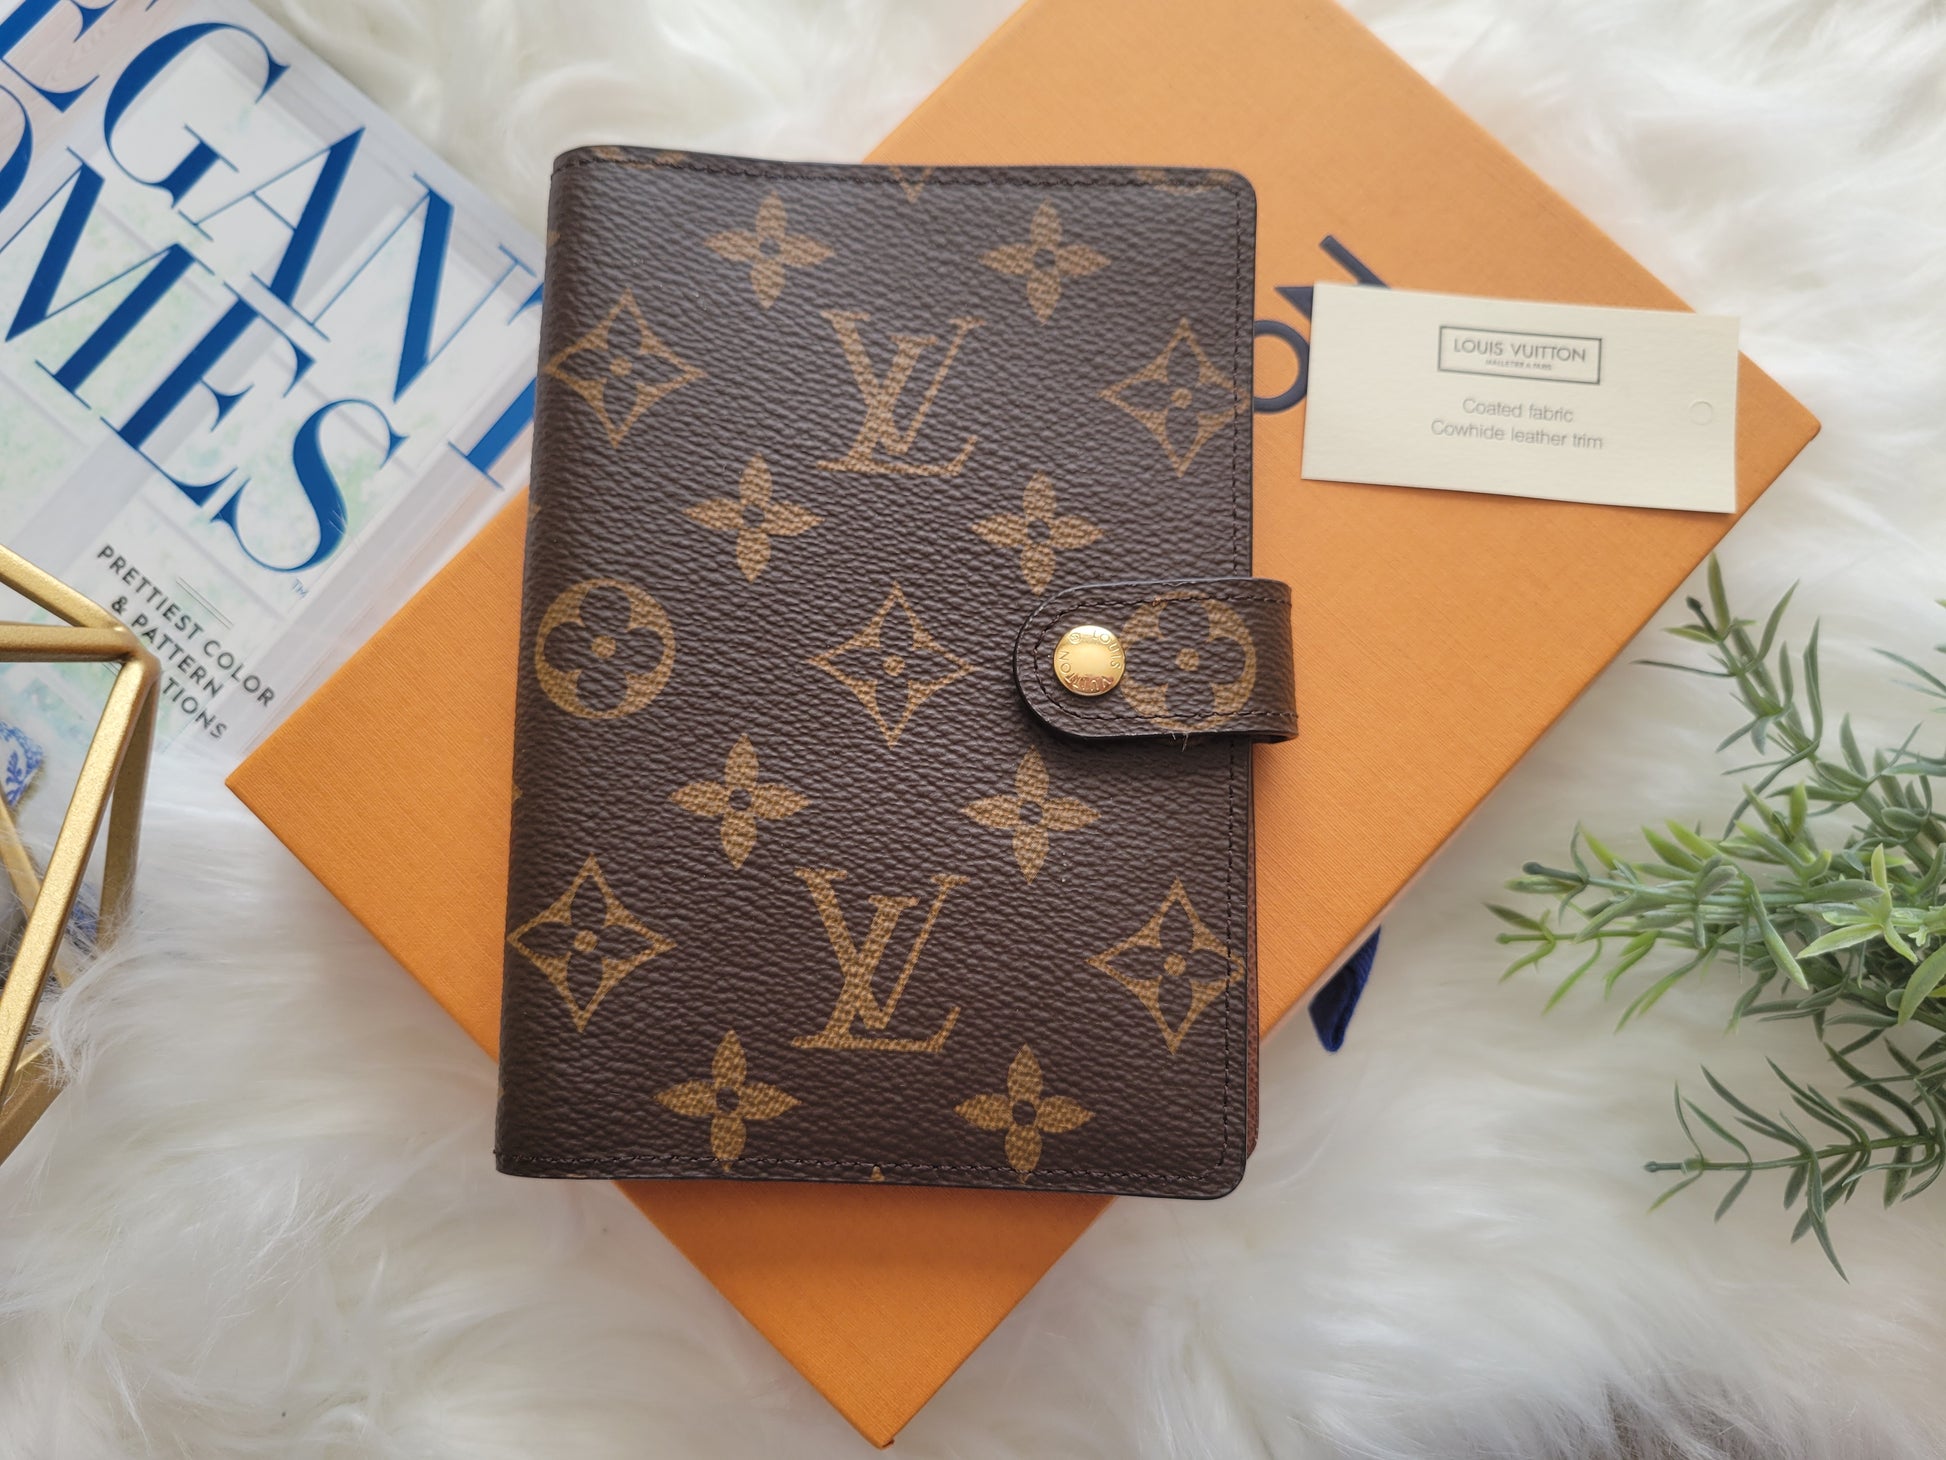 Lv Small Ring Agenda Reviewed